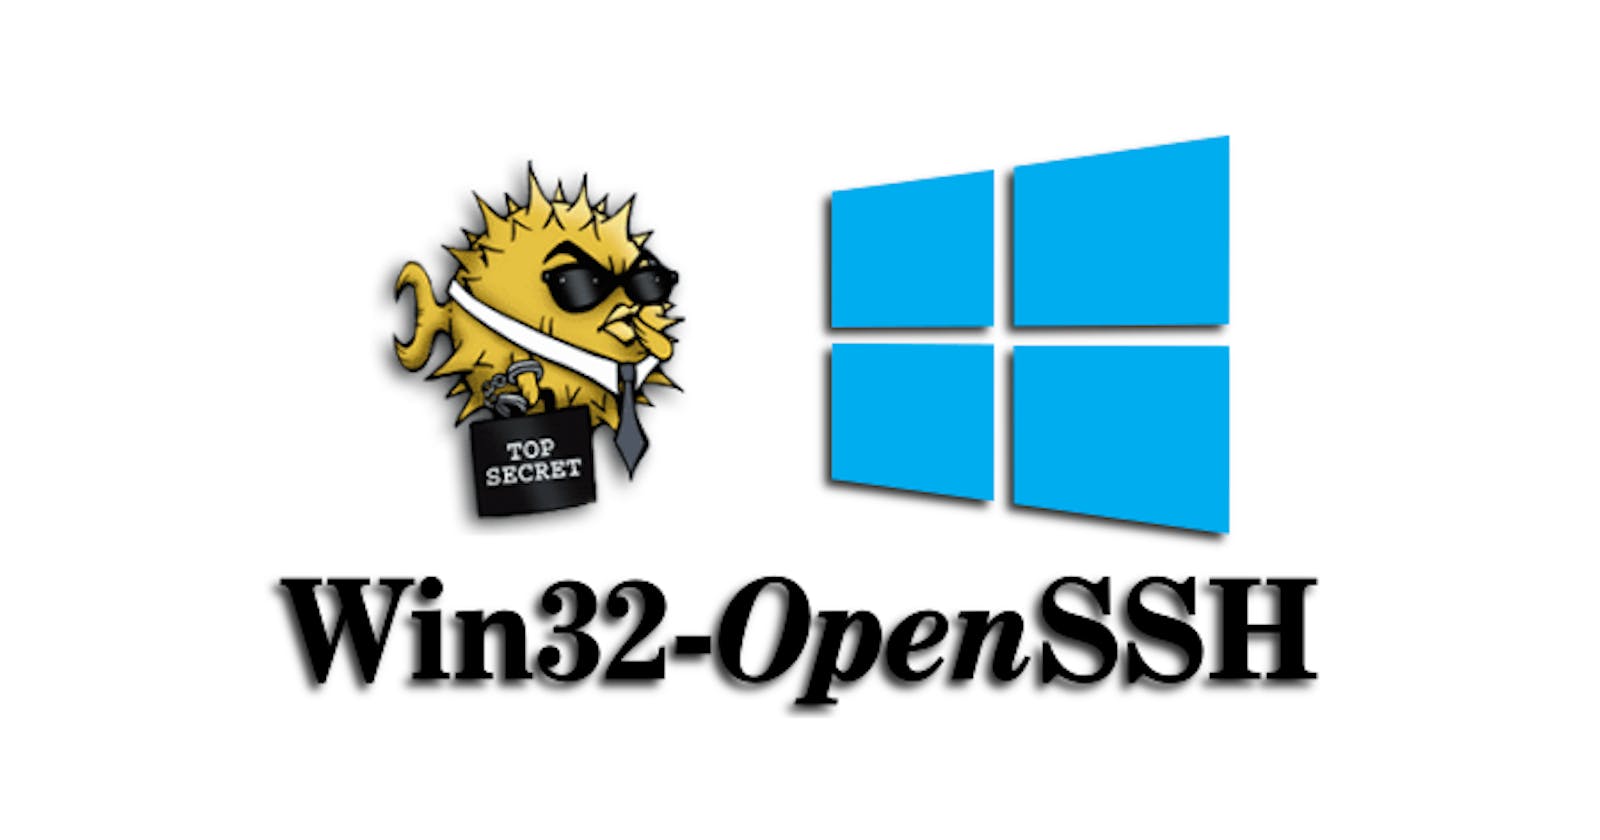 Fastest Way To Get Your Hands on the New Win32-OpenSSH